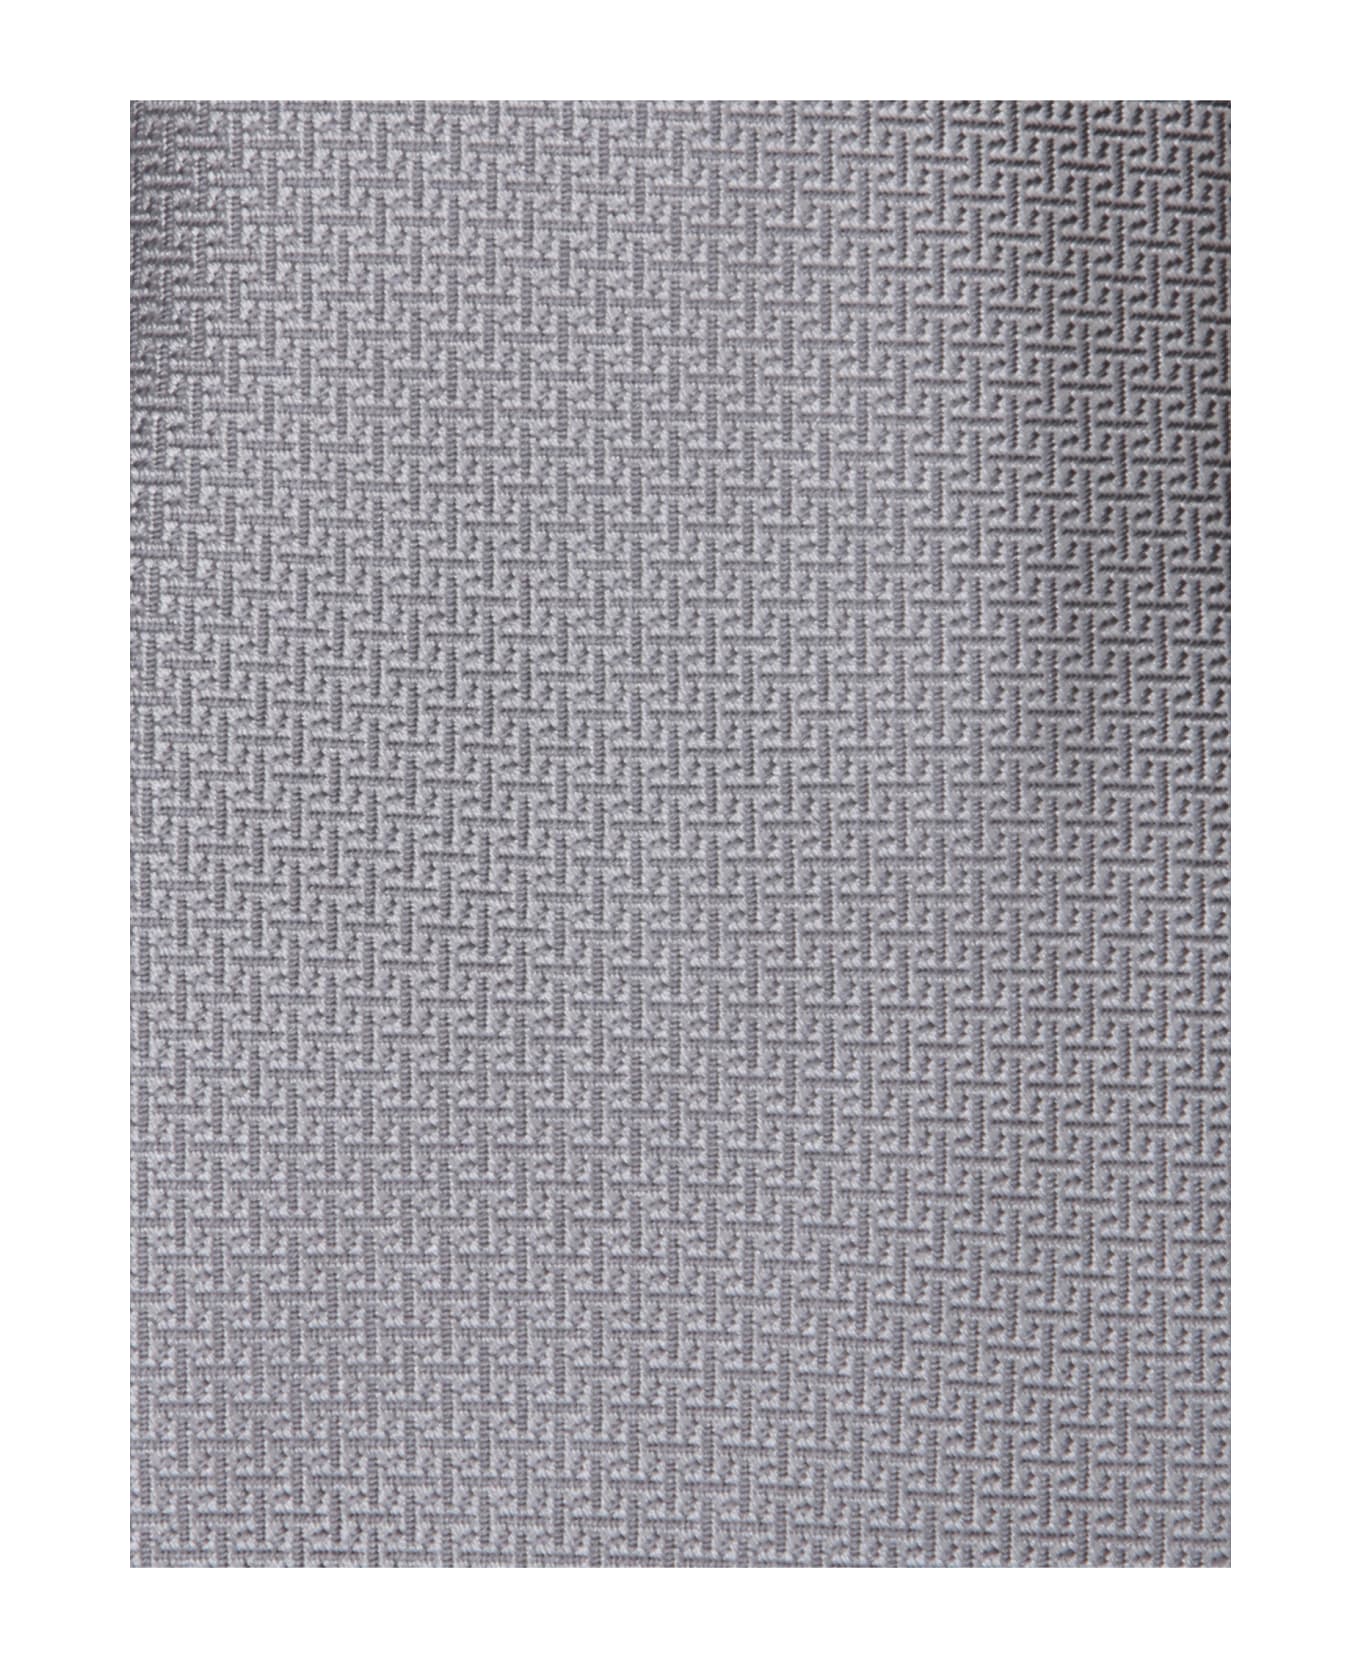 Canali Micropattern Pearl Grey Tie - Grey ネクタイ